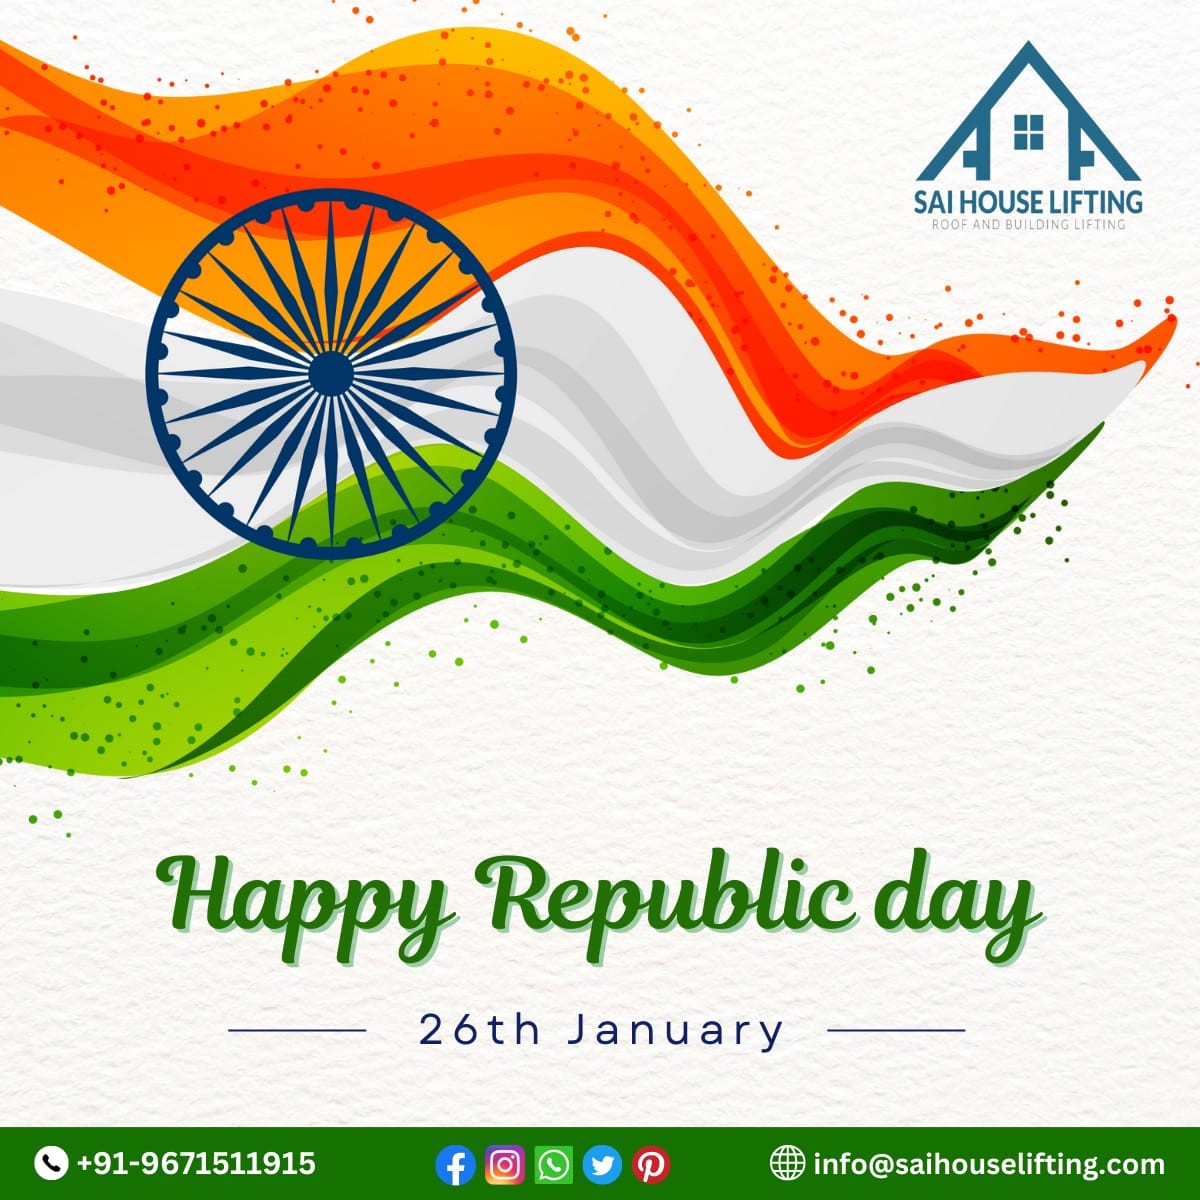 We Wish You All A Very Happy Republic Day 2023 2